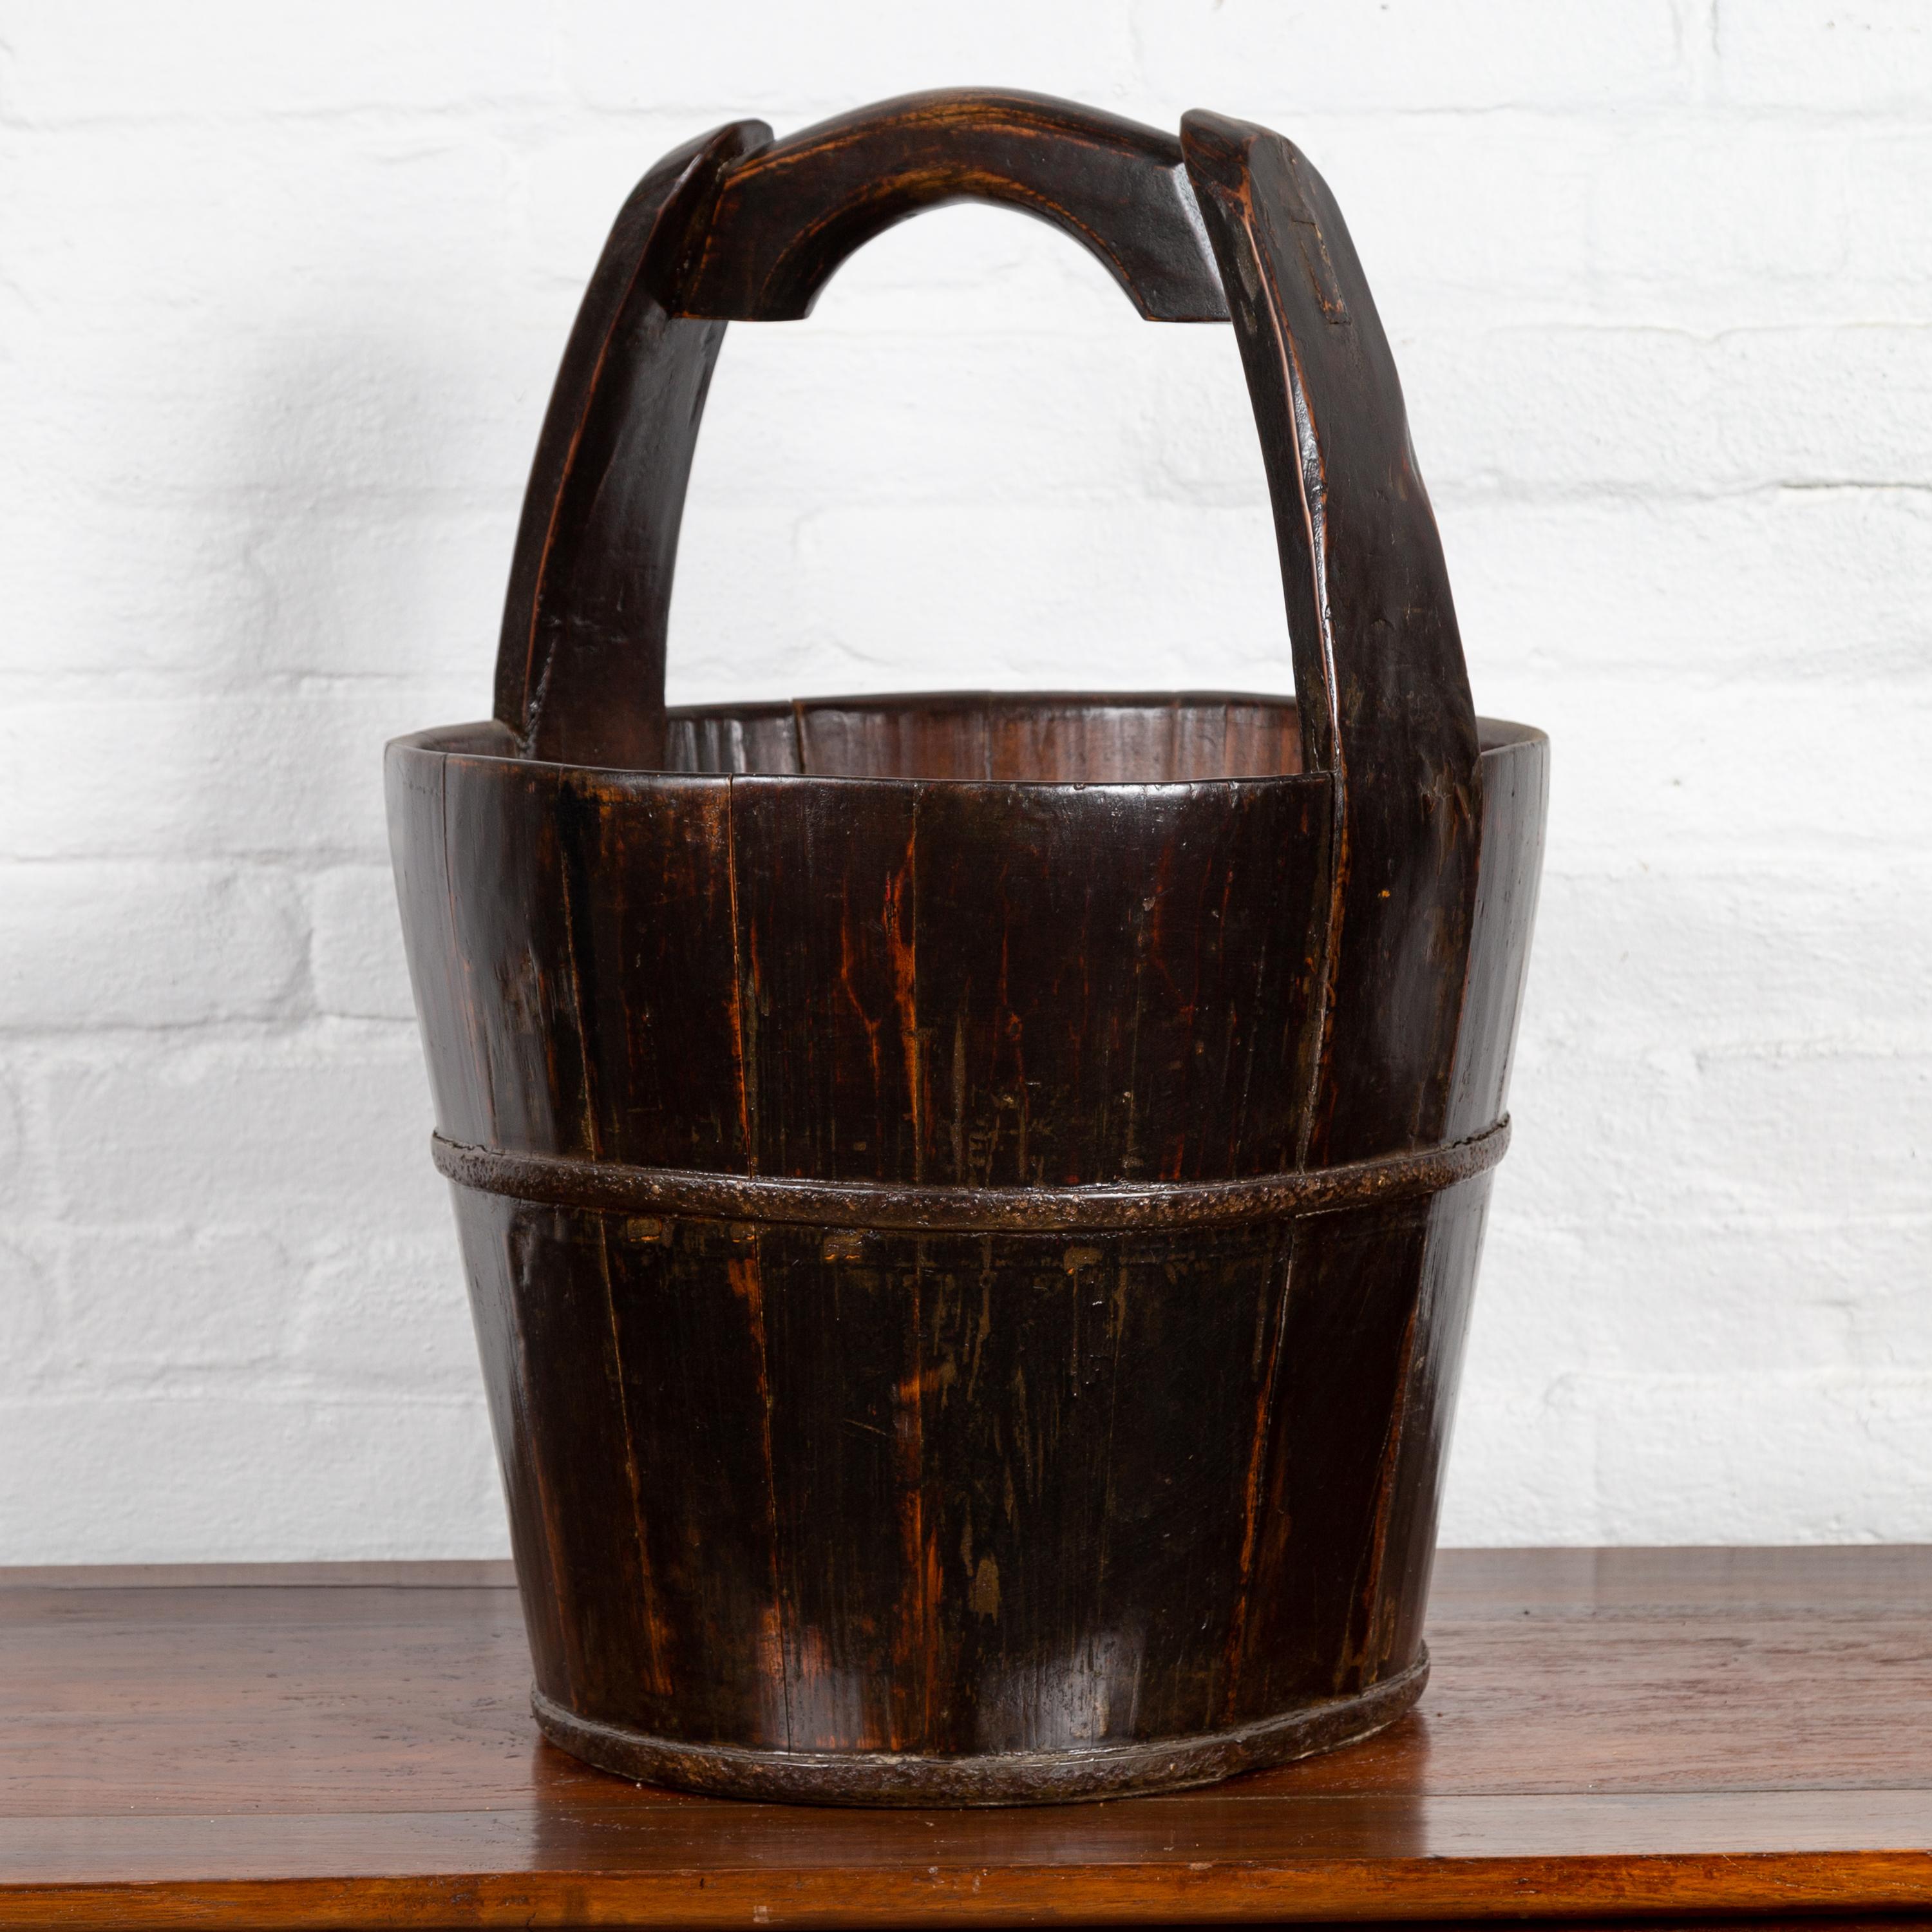 A Chinese rustic wooden bucket from the 19th century, with large curving handle. Born in Southern China during the 19th century, this wooden bucket charms our eyes with its nice proportions and dark patina. Featuring a cylindrical tapering body